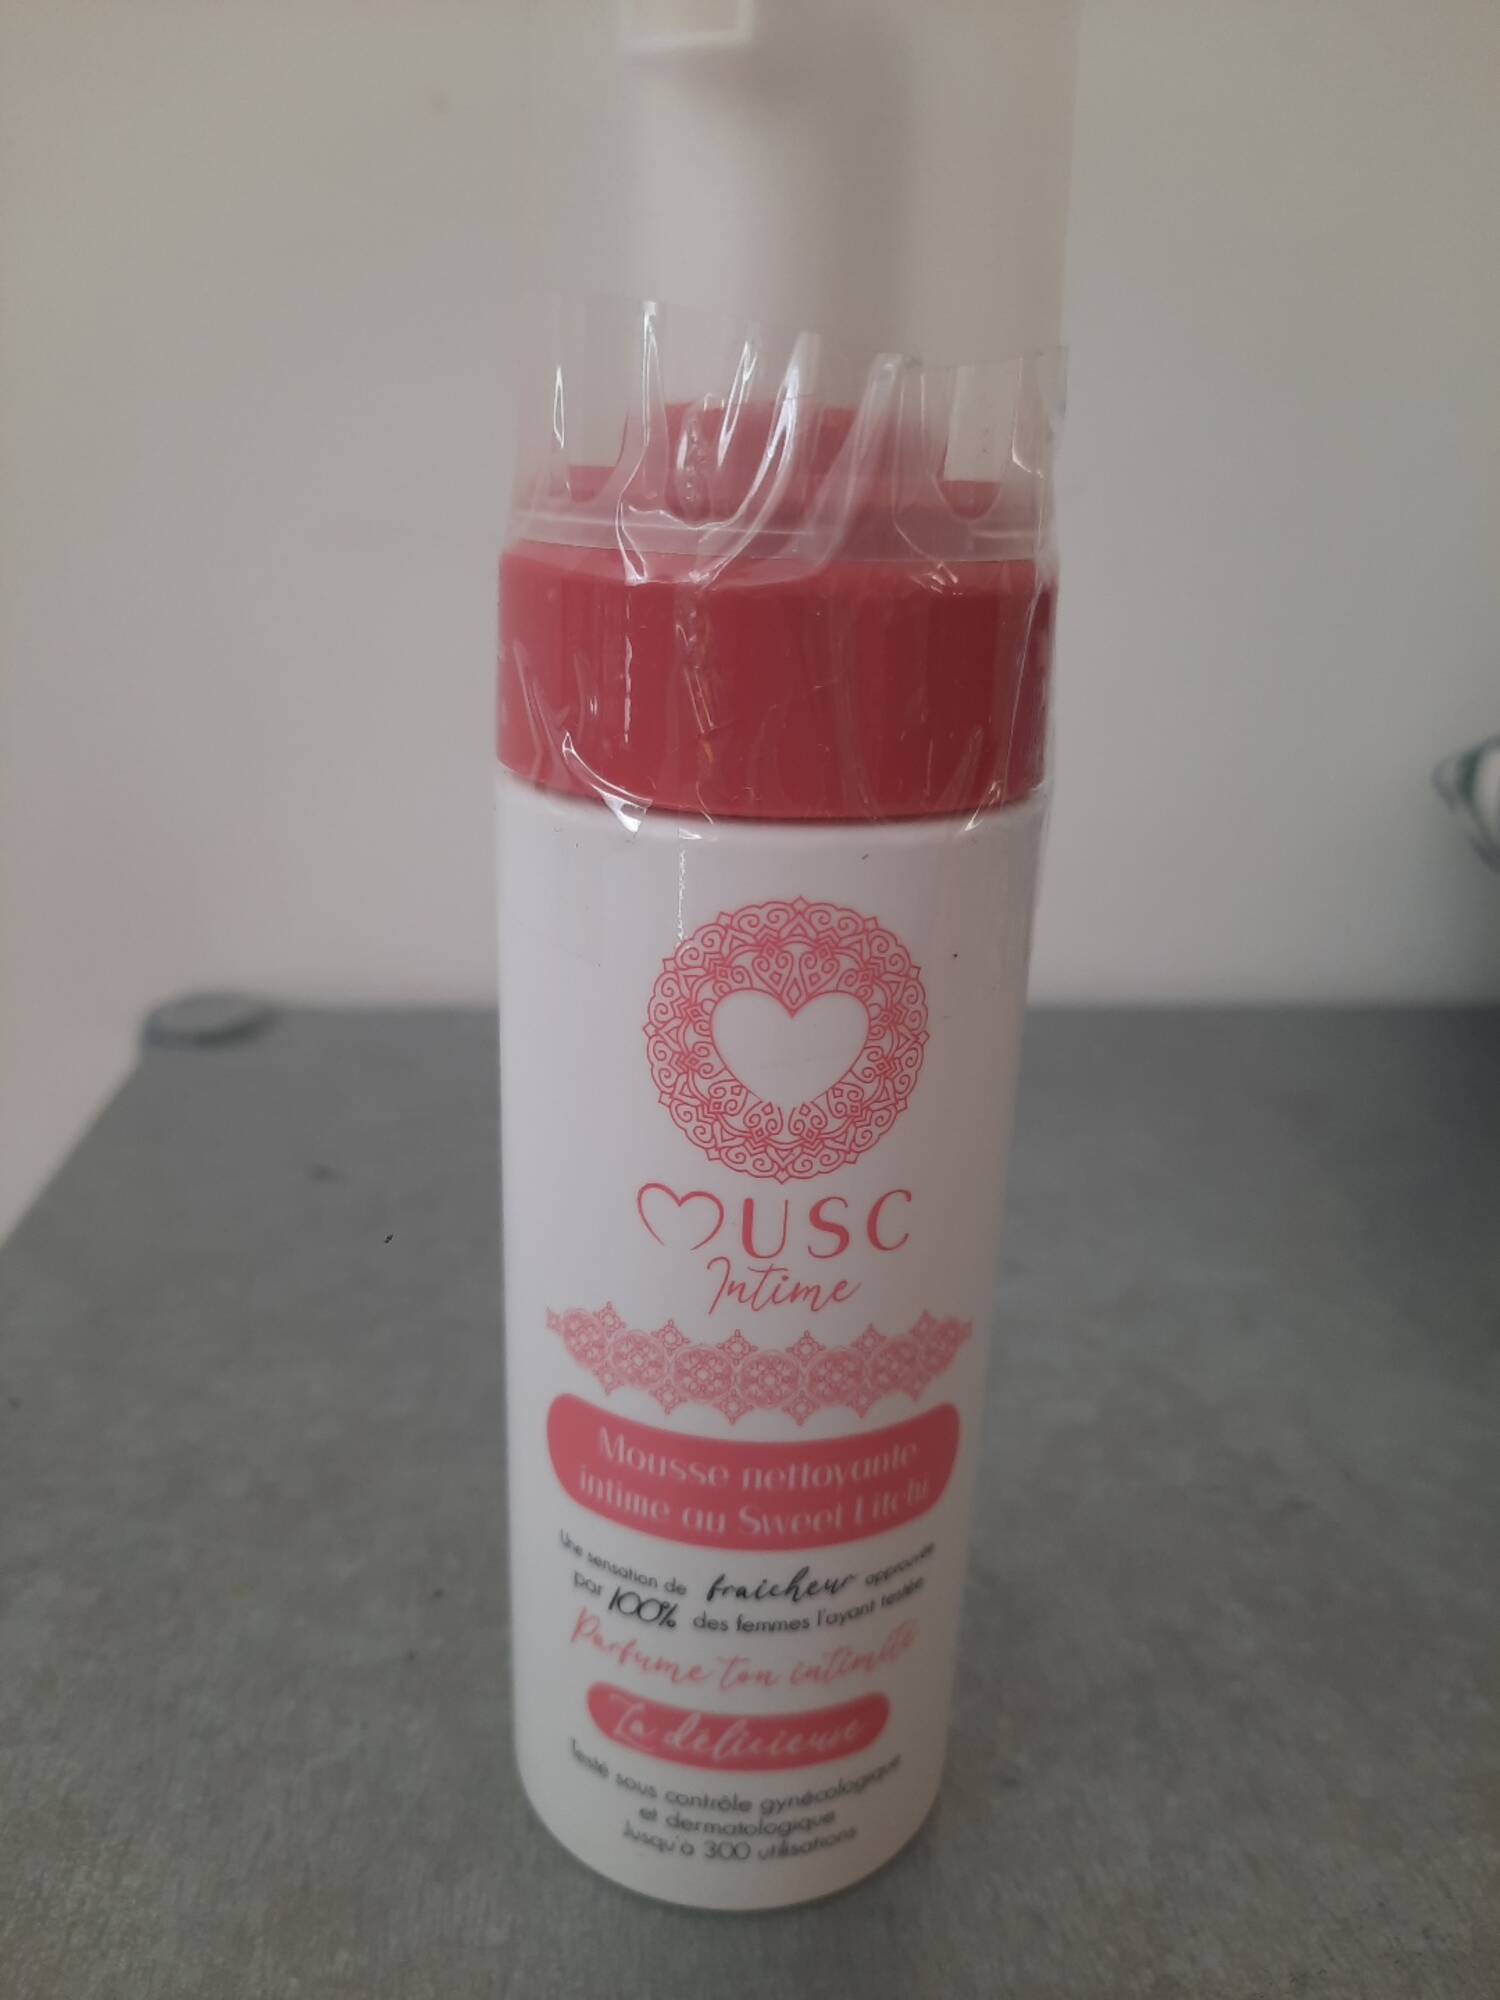 MUSC INTIME - Mousse nettoyante intime au sweet litchi